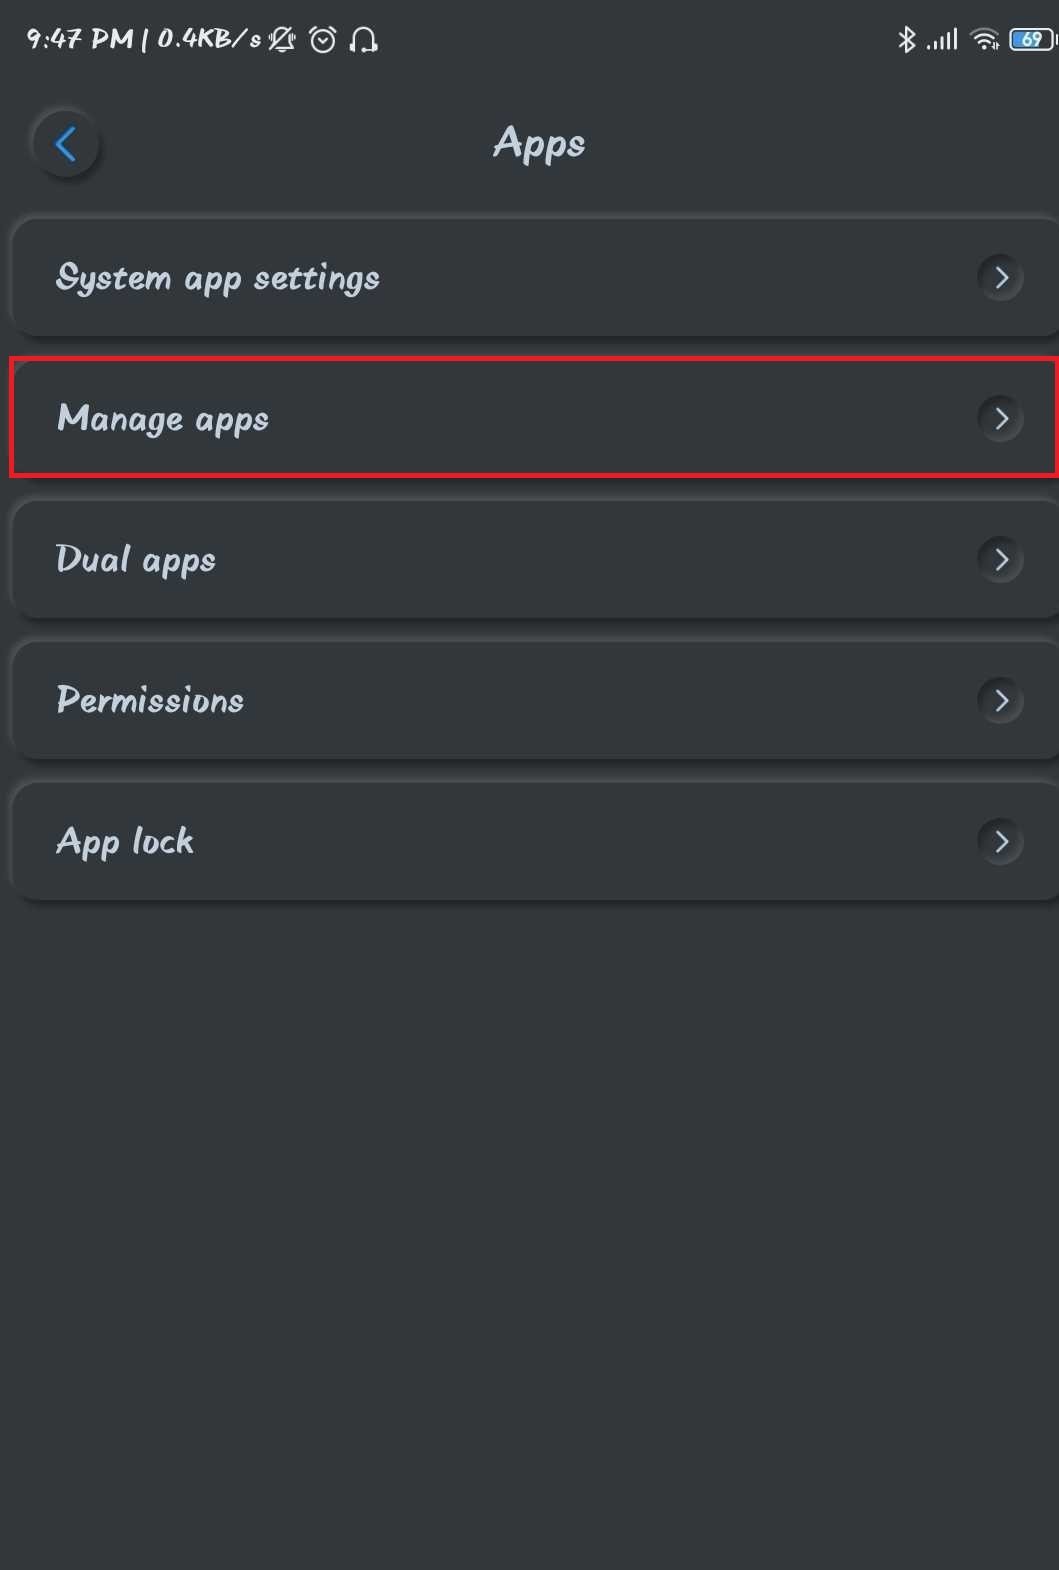 go to the Settings of your Android device, find the applications option, and tap on Apps.